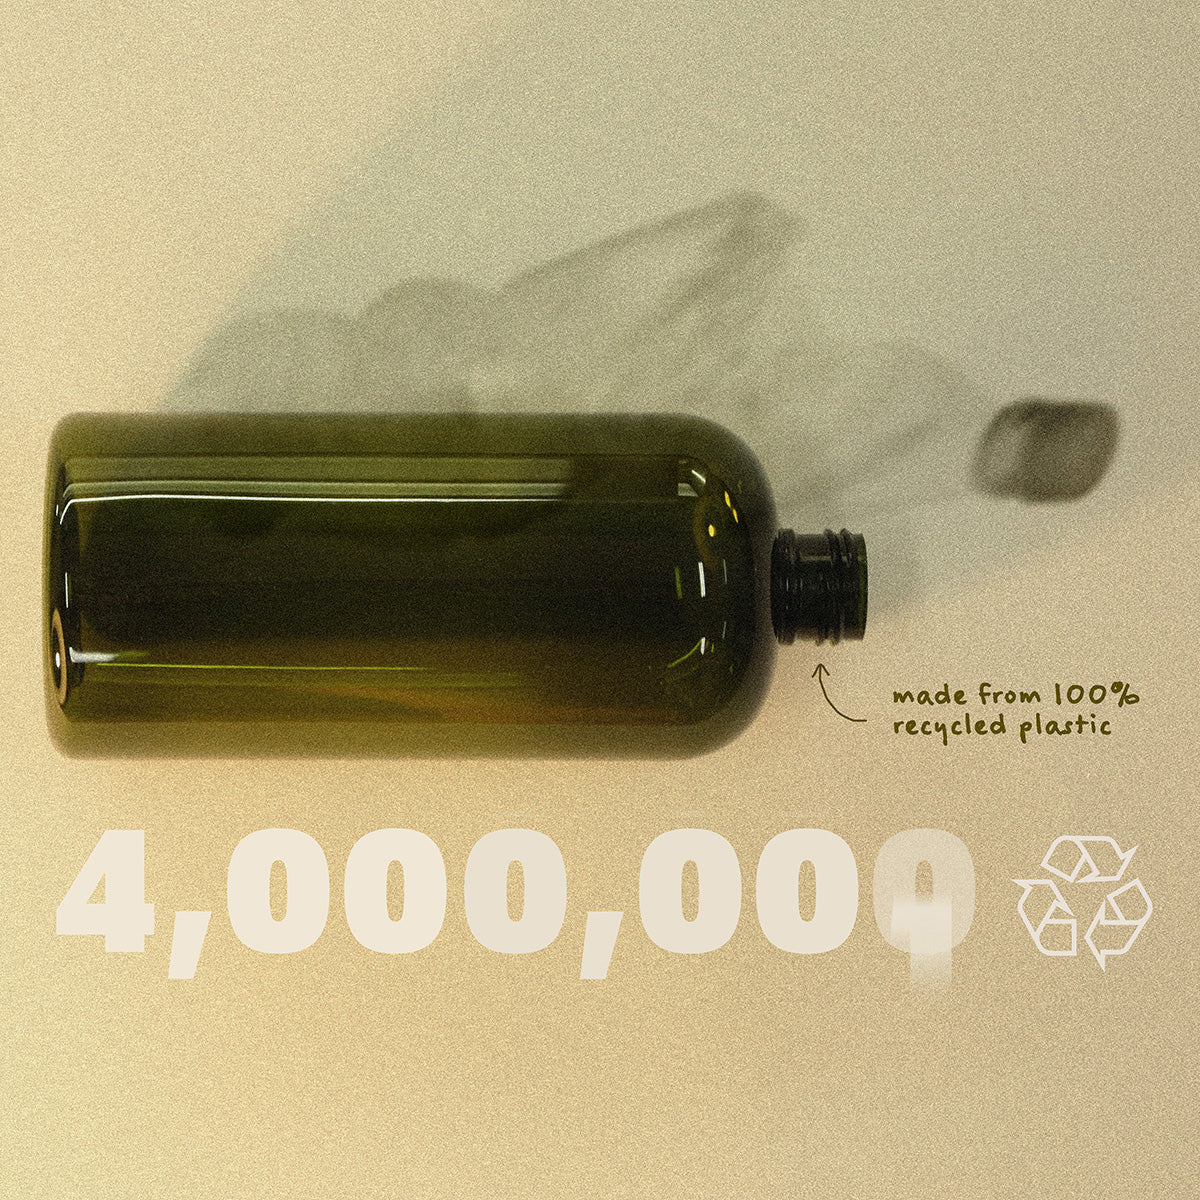 UPDATE: 4M PET BOTTLES RECYCLED!